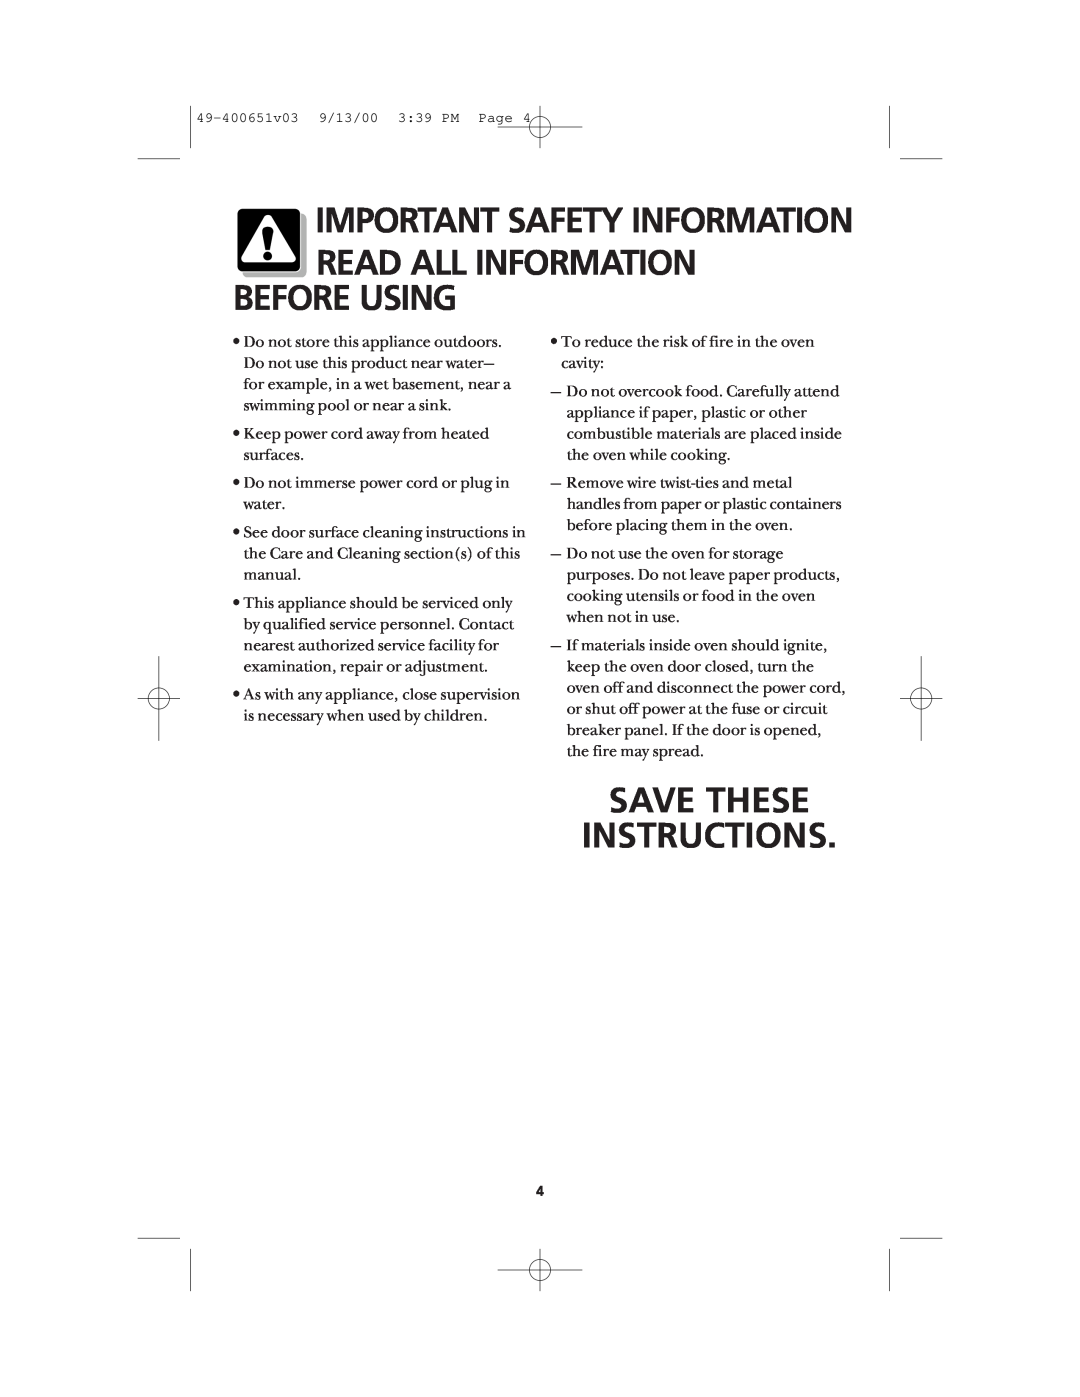 Frigidaire FMT148 warranty Save These Instructions, Important Safety Information, Read All Information Before Using 